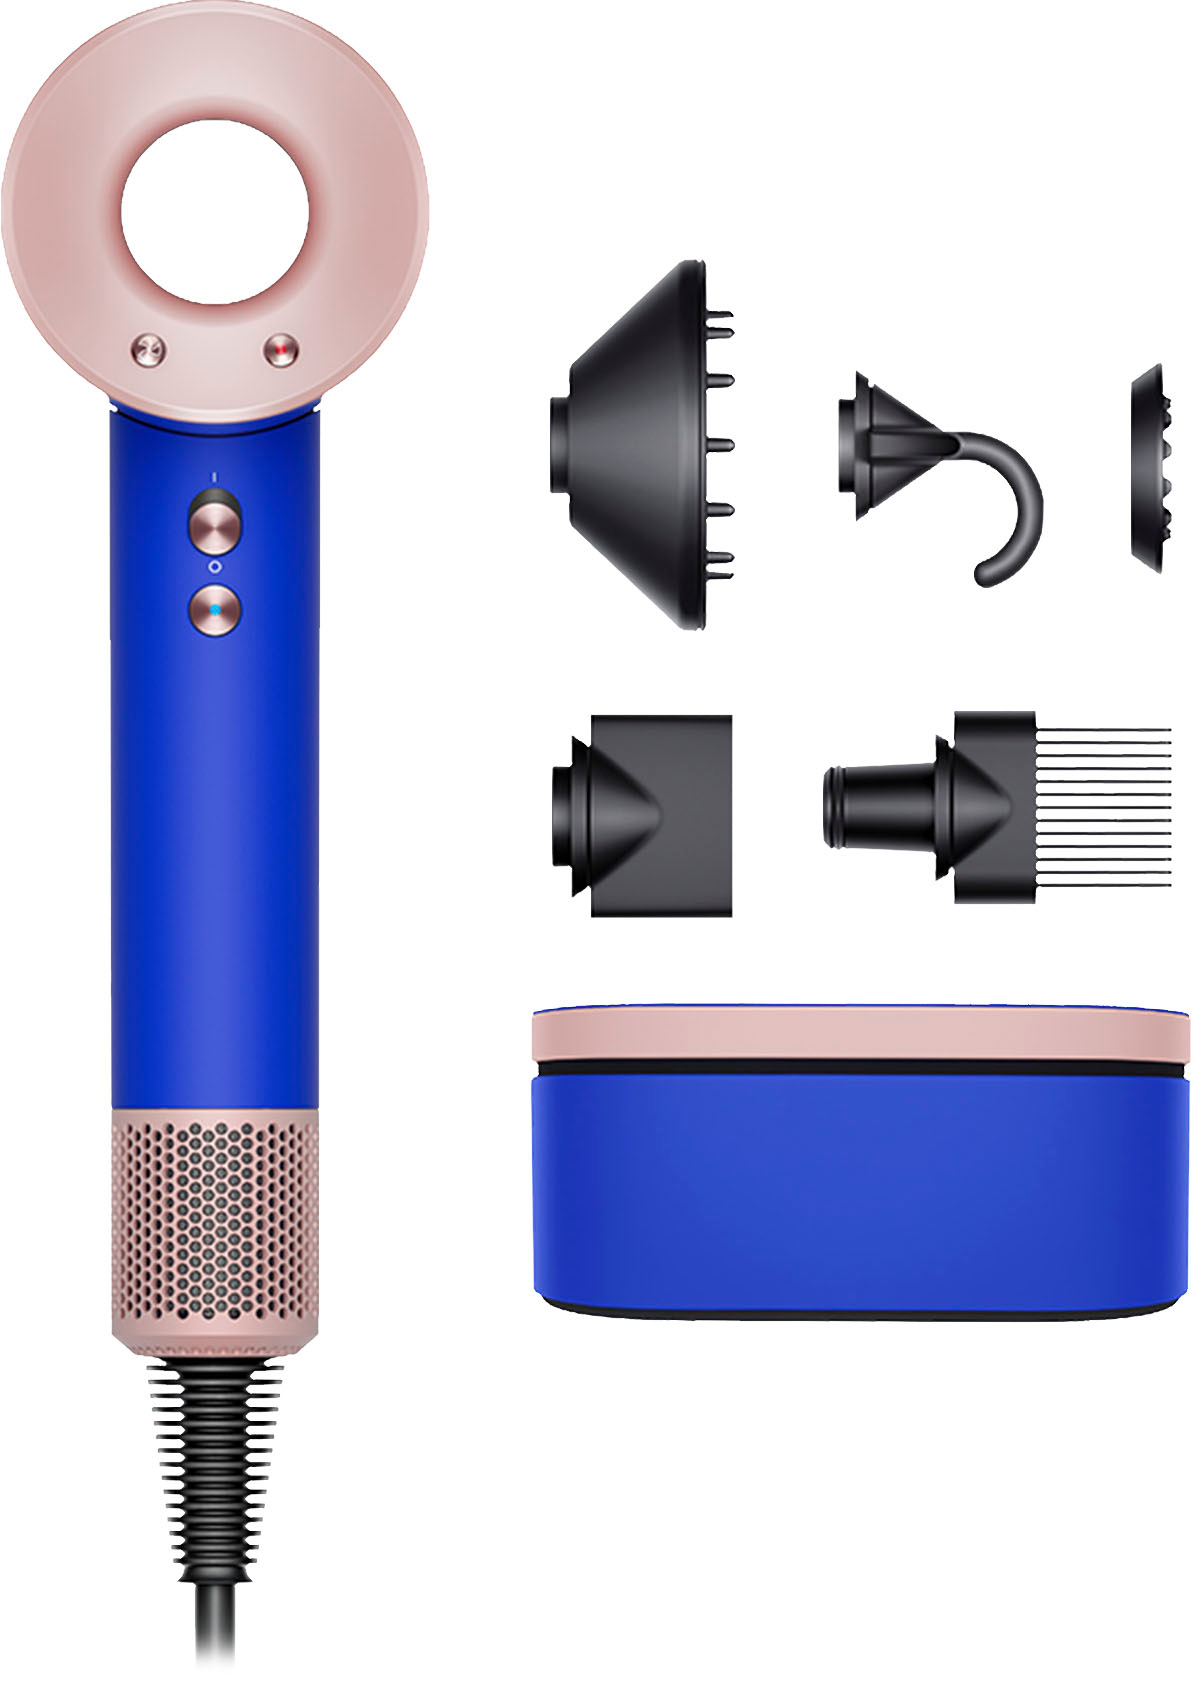 Dyson Supersonic Hair Dryer Ultra blue/Blush pink 460099-01 - Best Buy